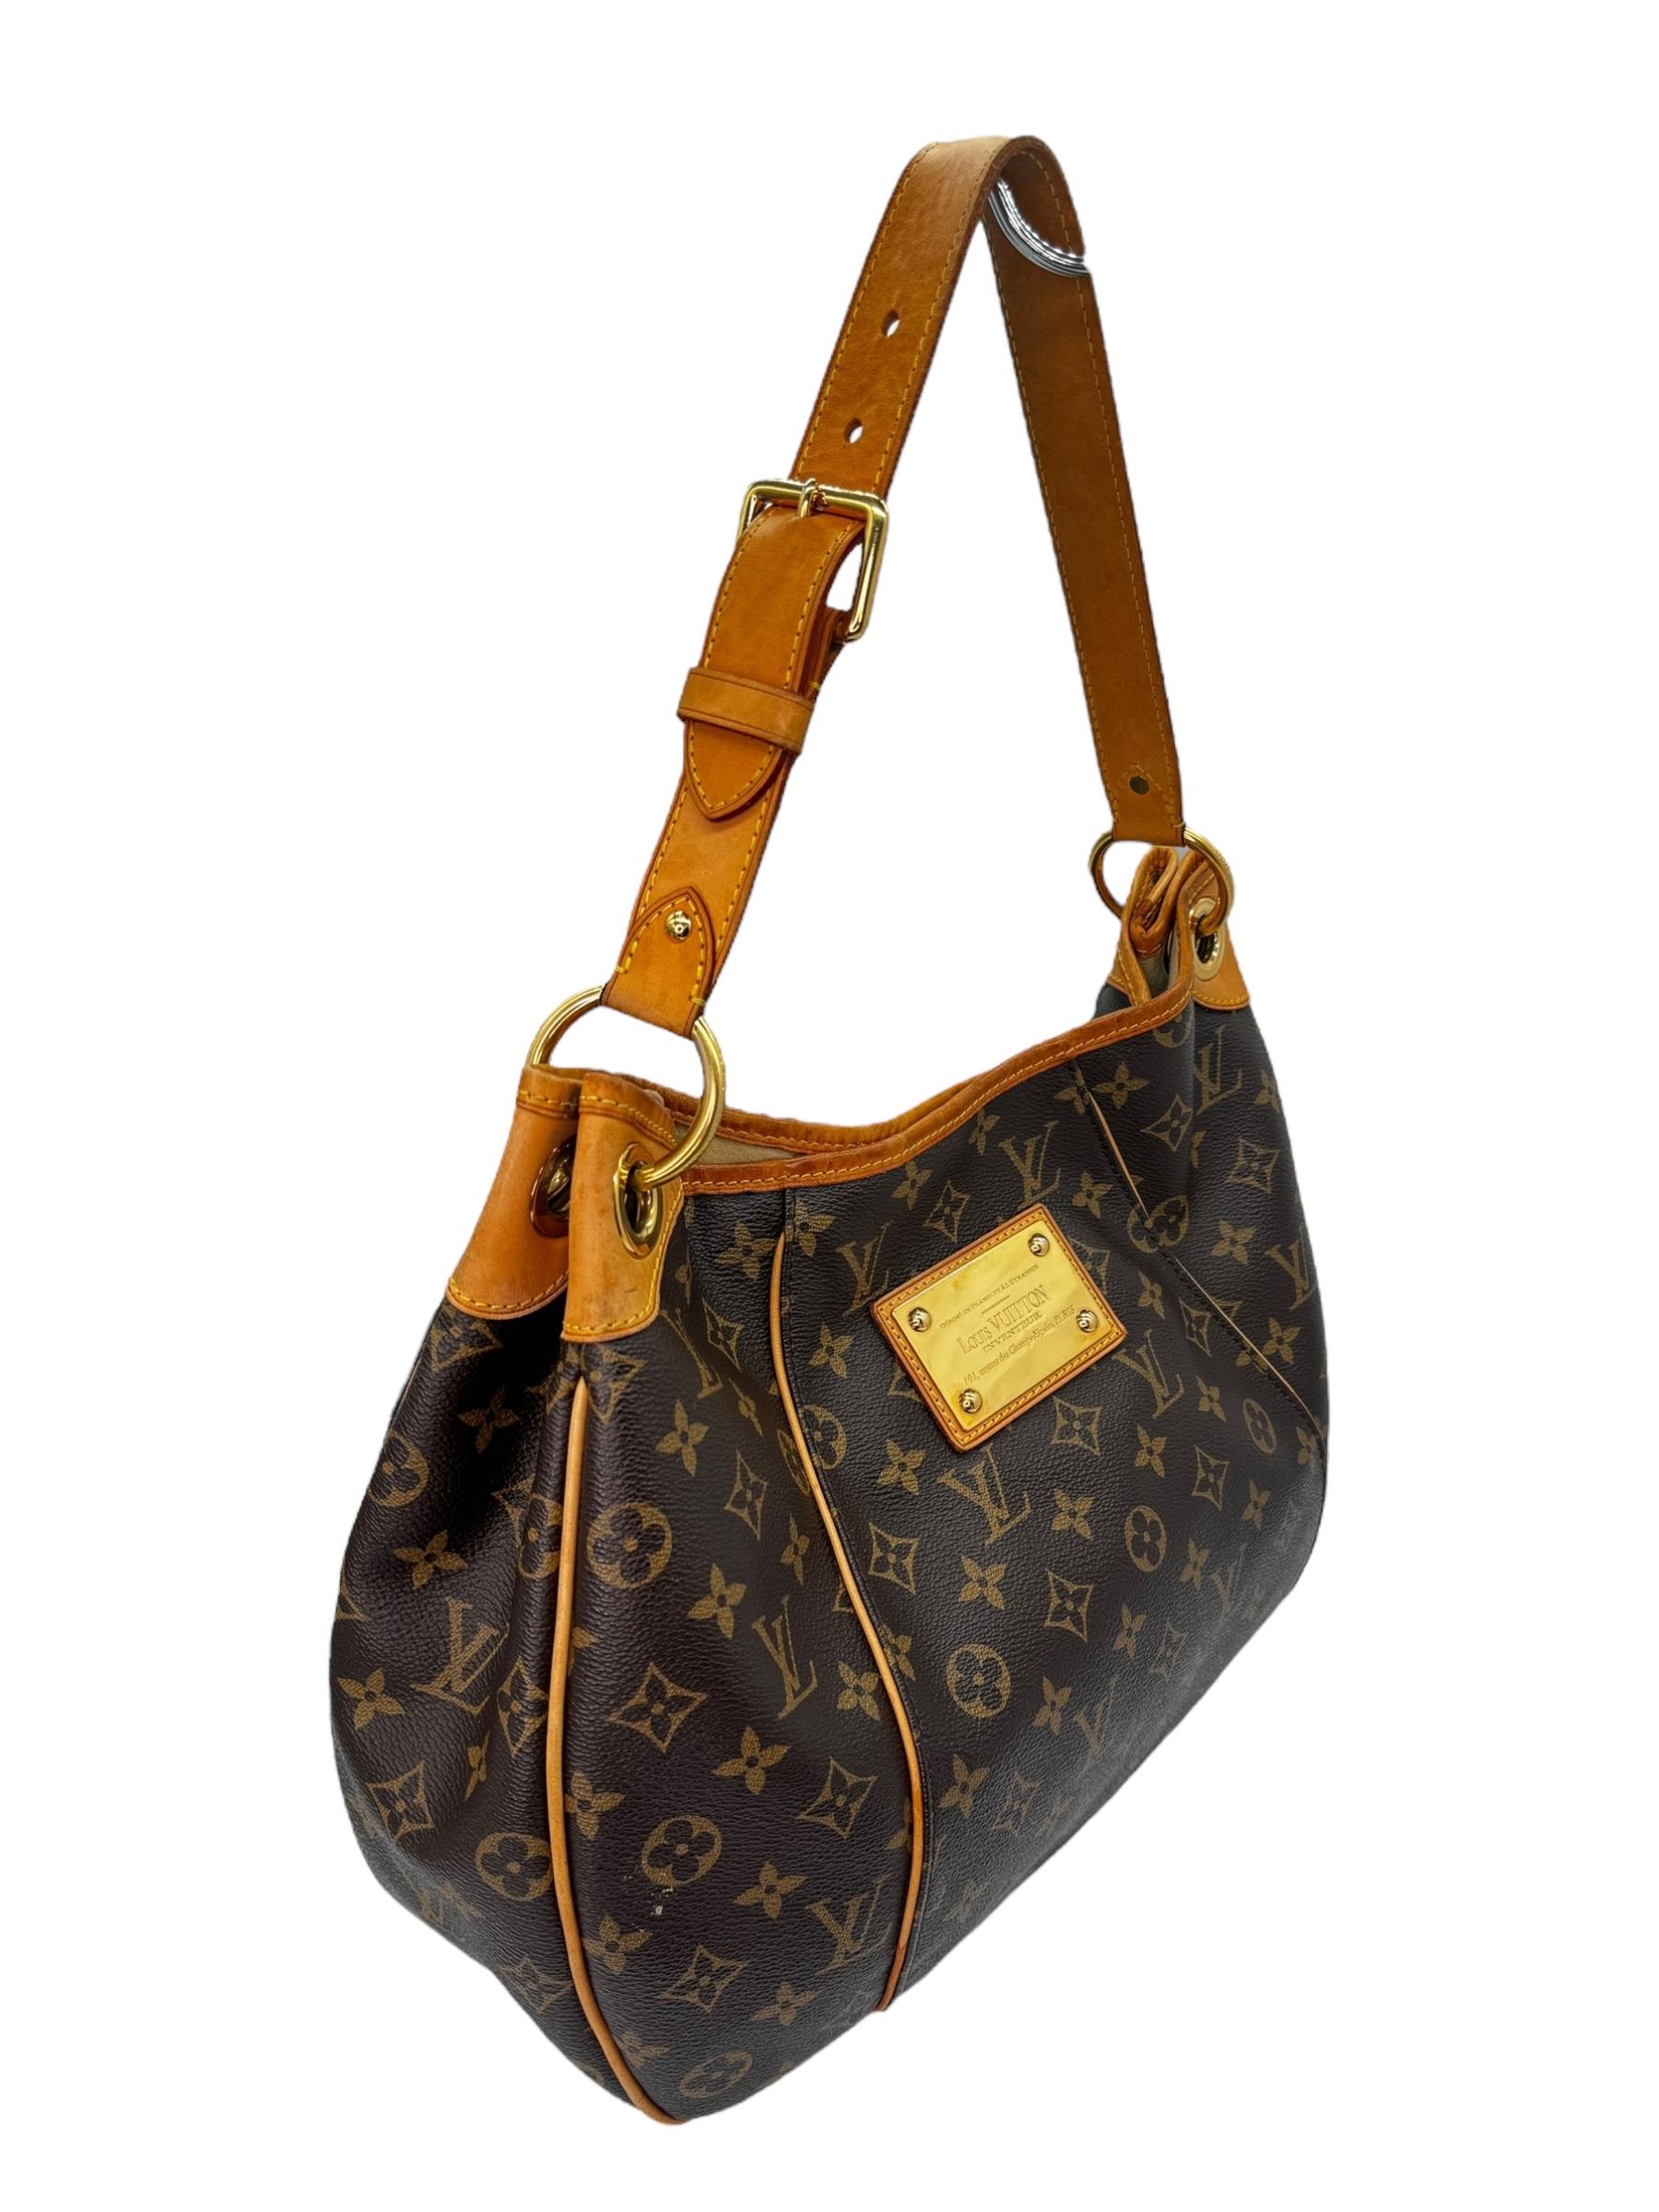 This stylish shoulder bag is finely crafted of classic Louis Vuitton monogram on toile canvas. It features an adjustable vachetta leather shoulder strap, vachetta leather piping and trim complete with polished brass hardware including a large